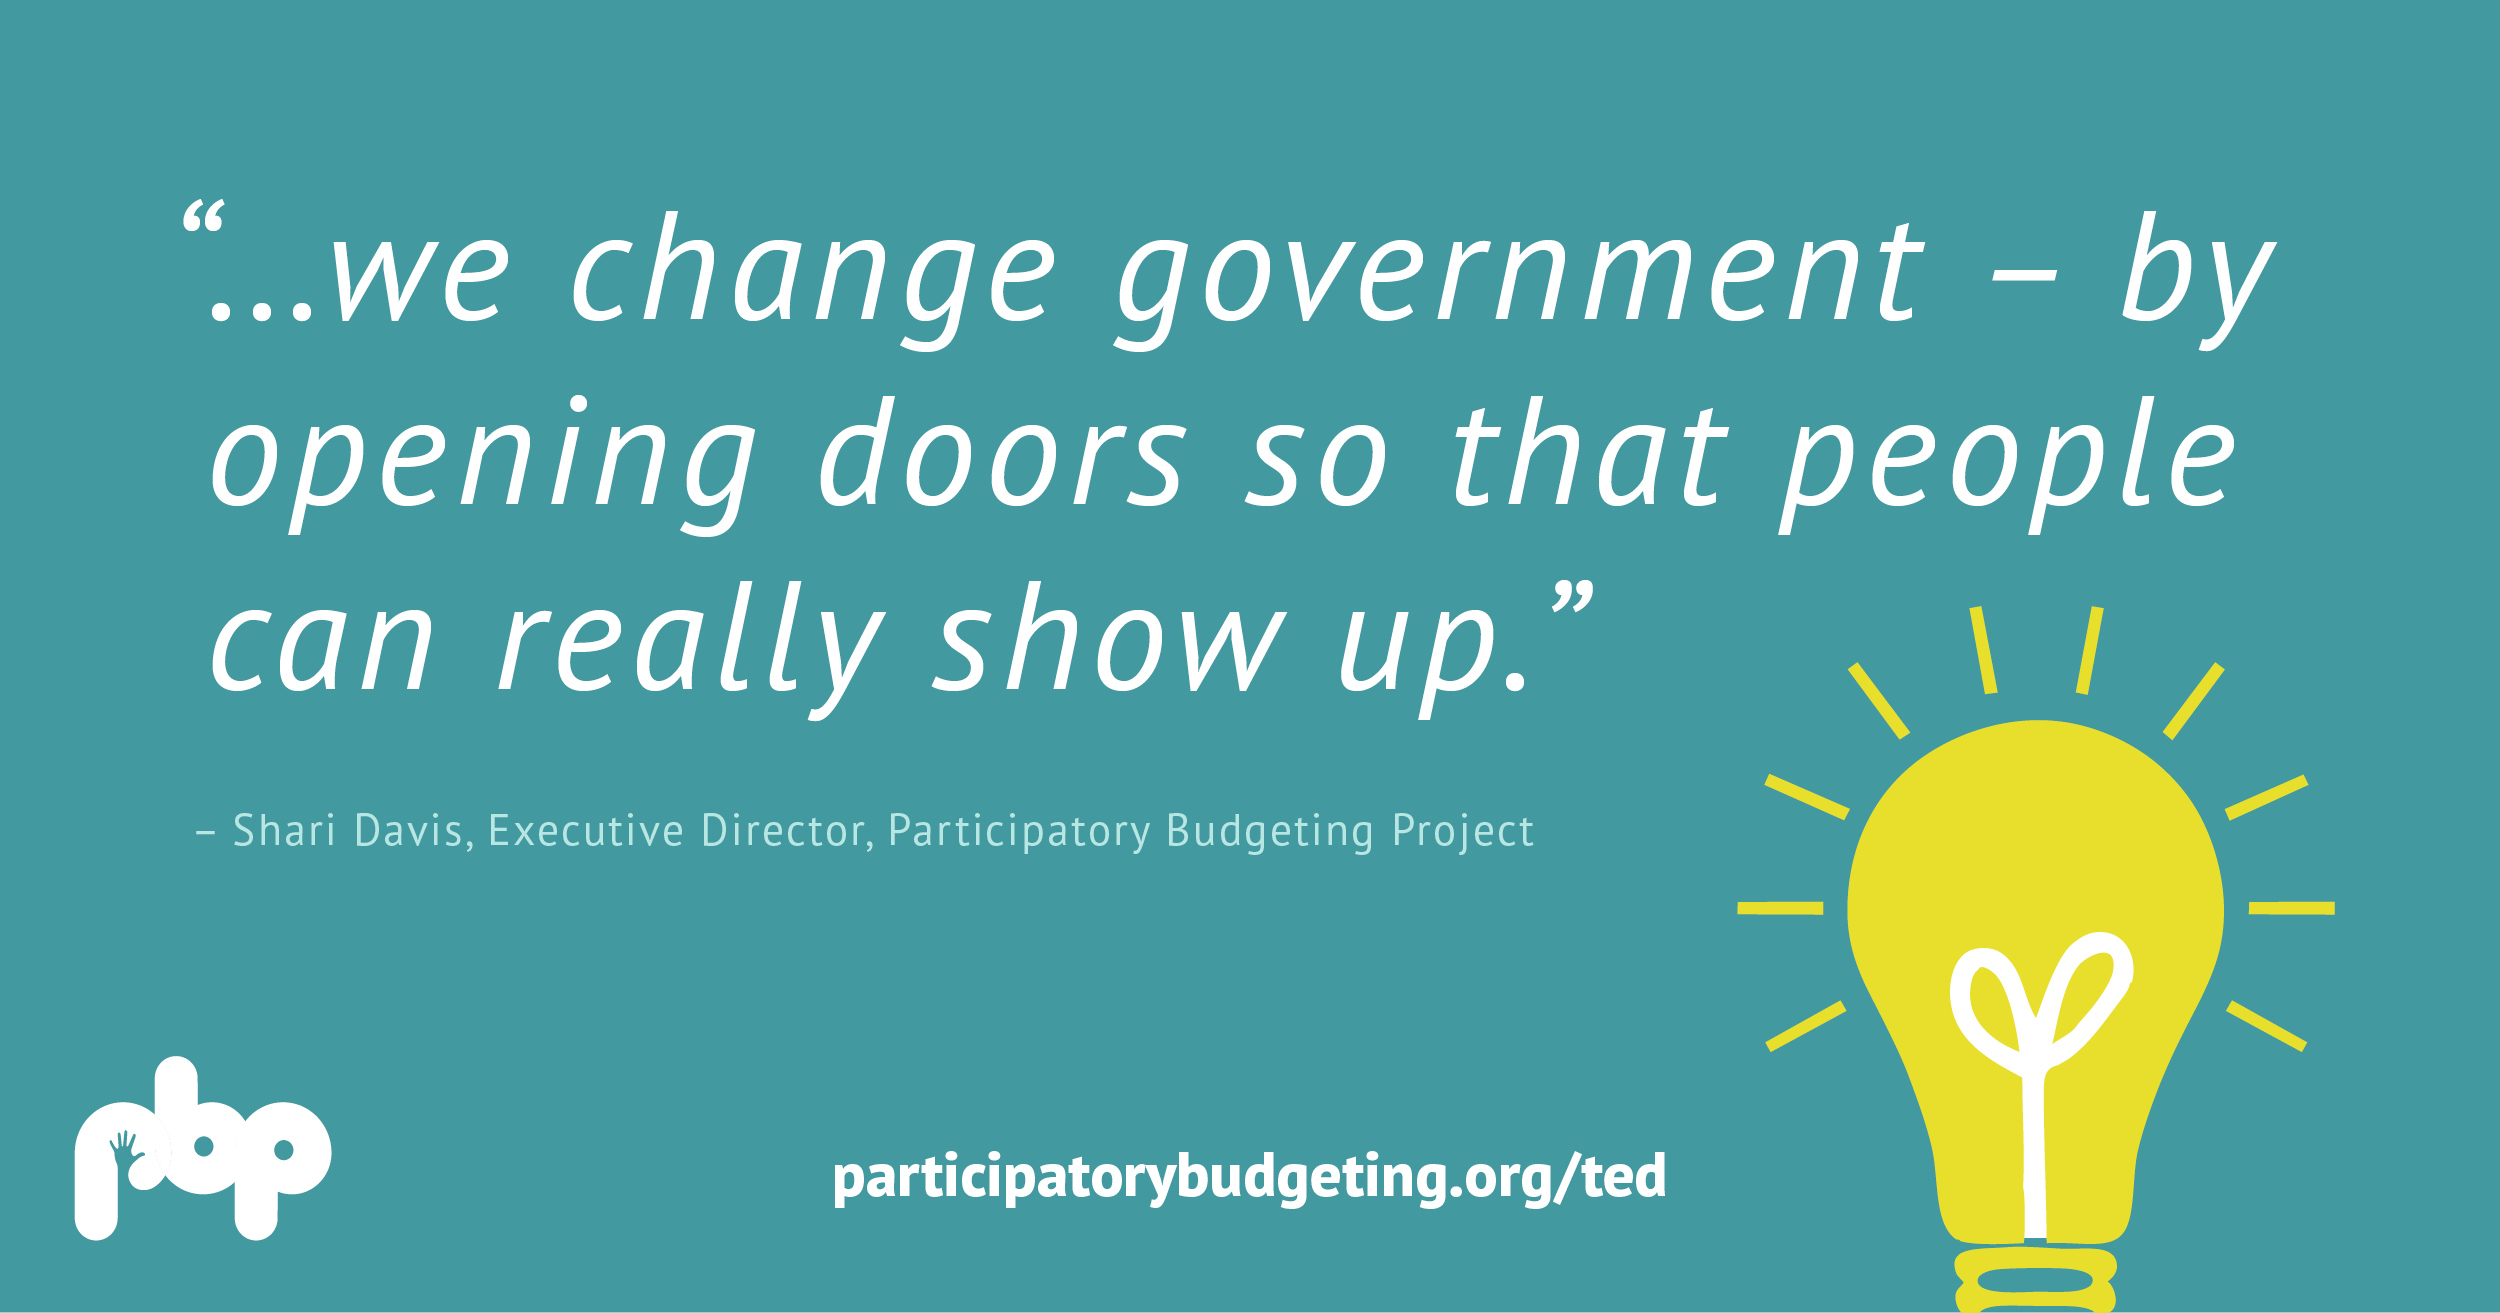 ...we change government - by opening doors so that people can really show up. - Shari Davis